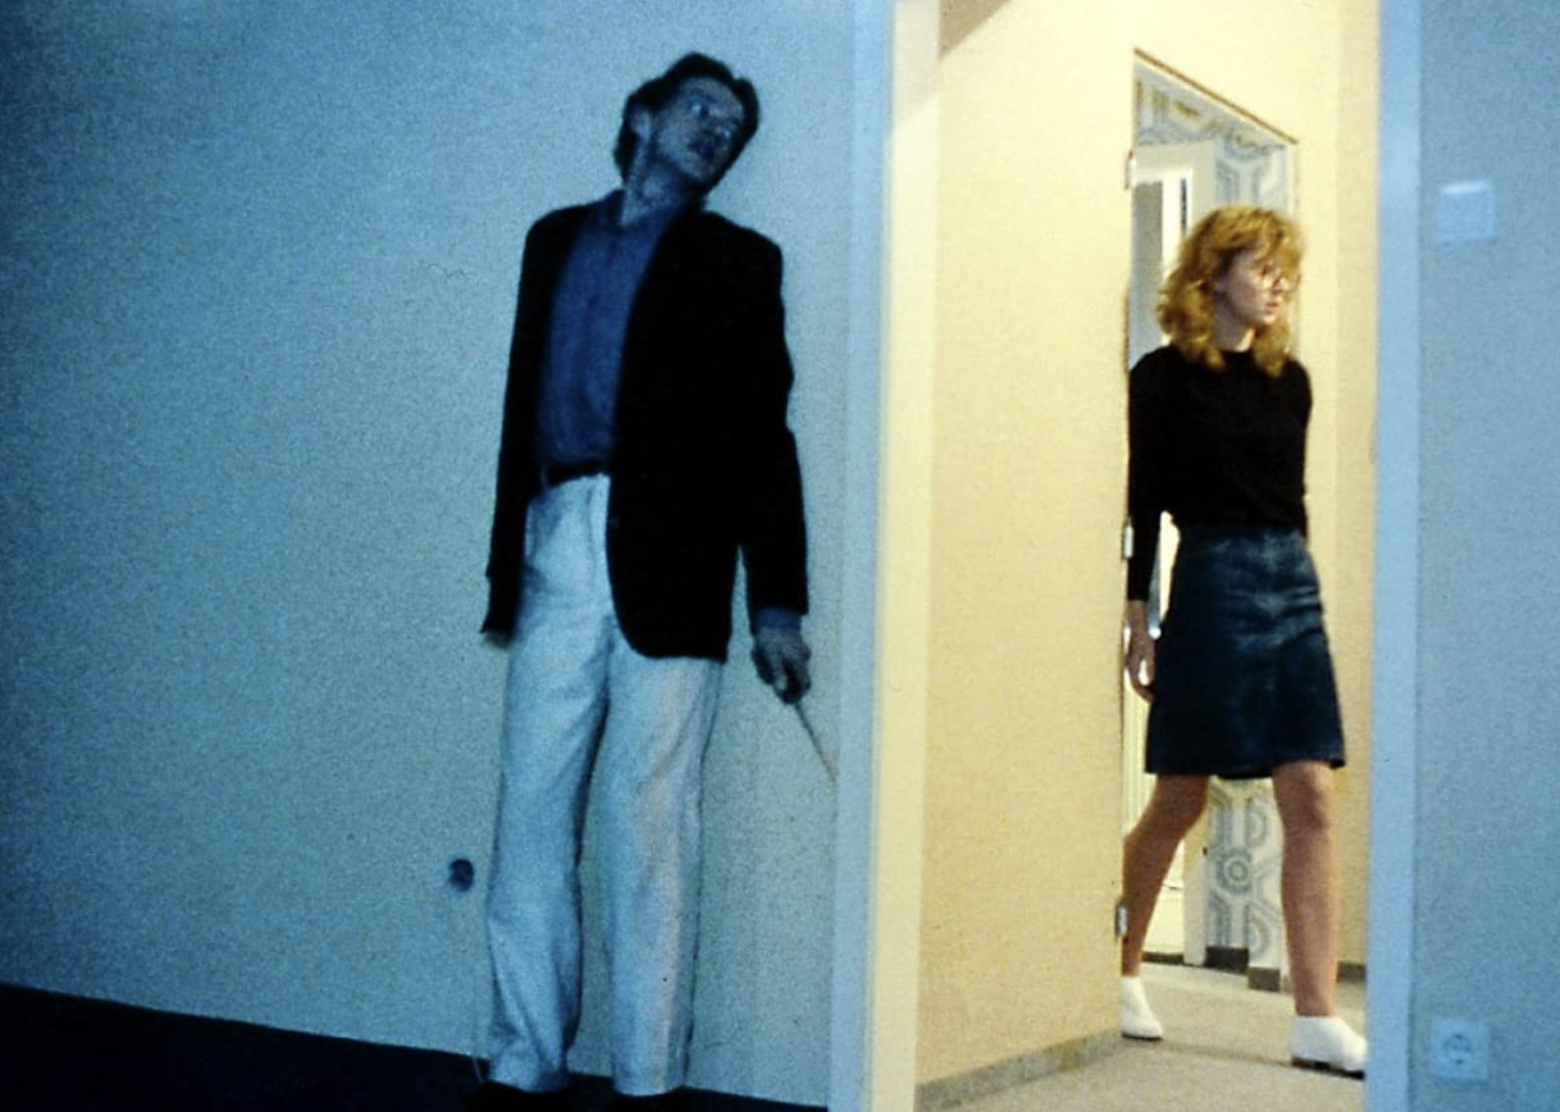 Erwin Leder and Silvia Ryder in "Angst"